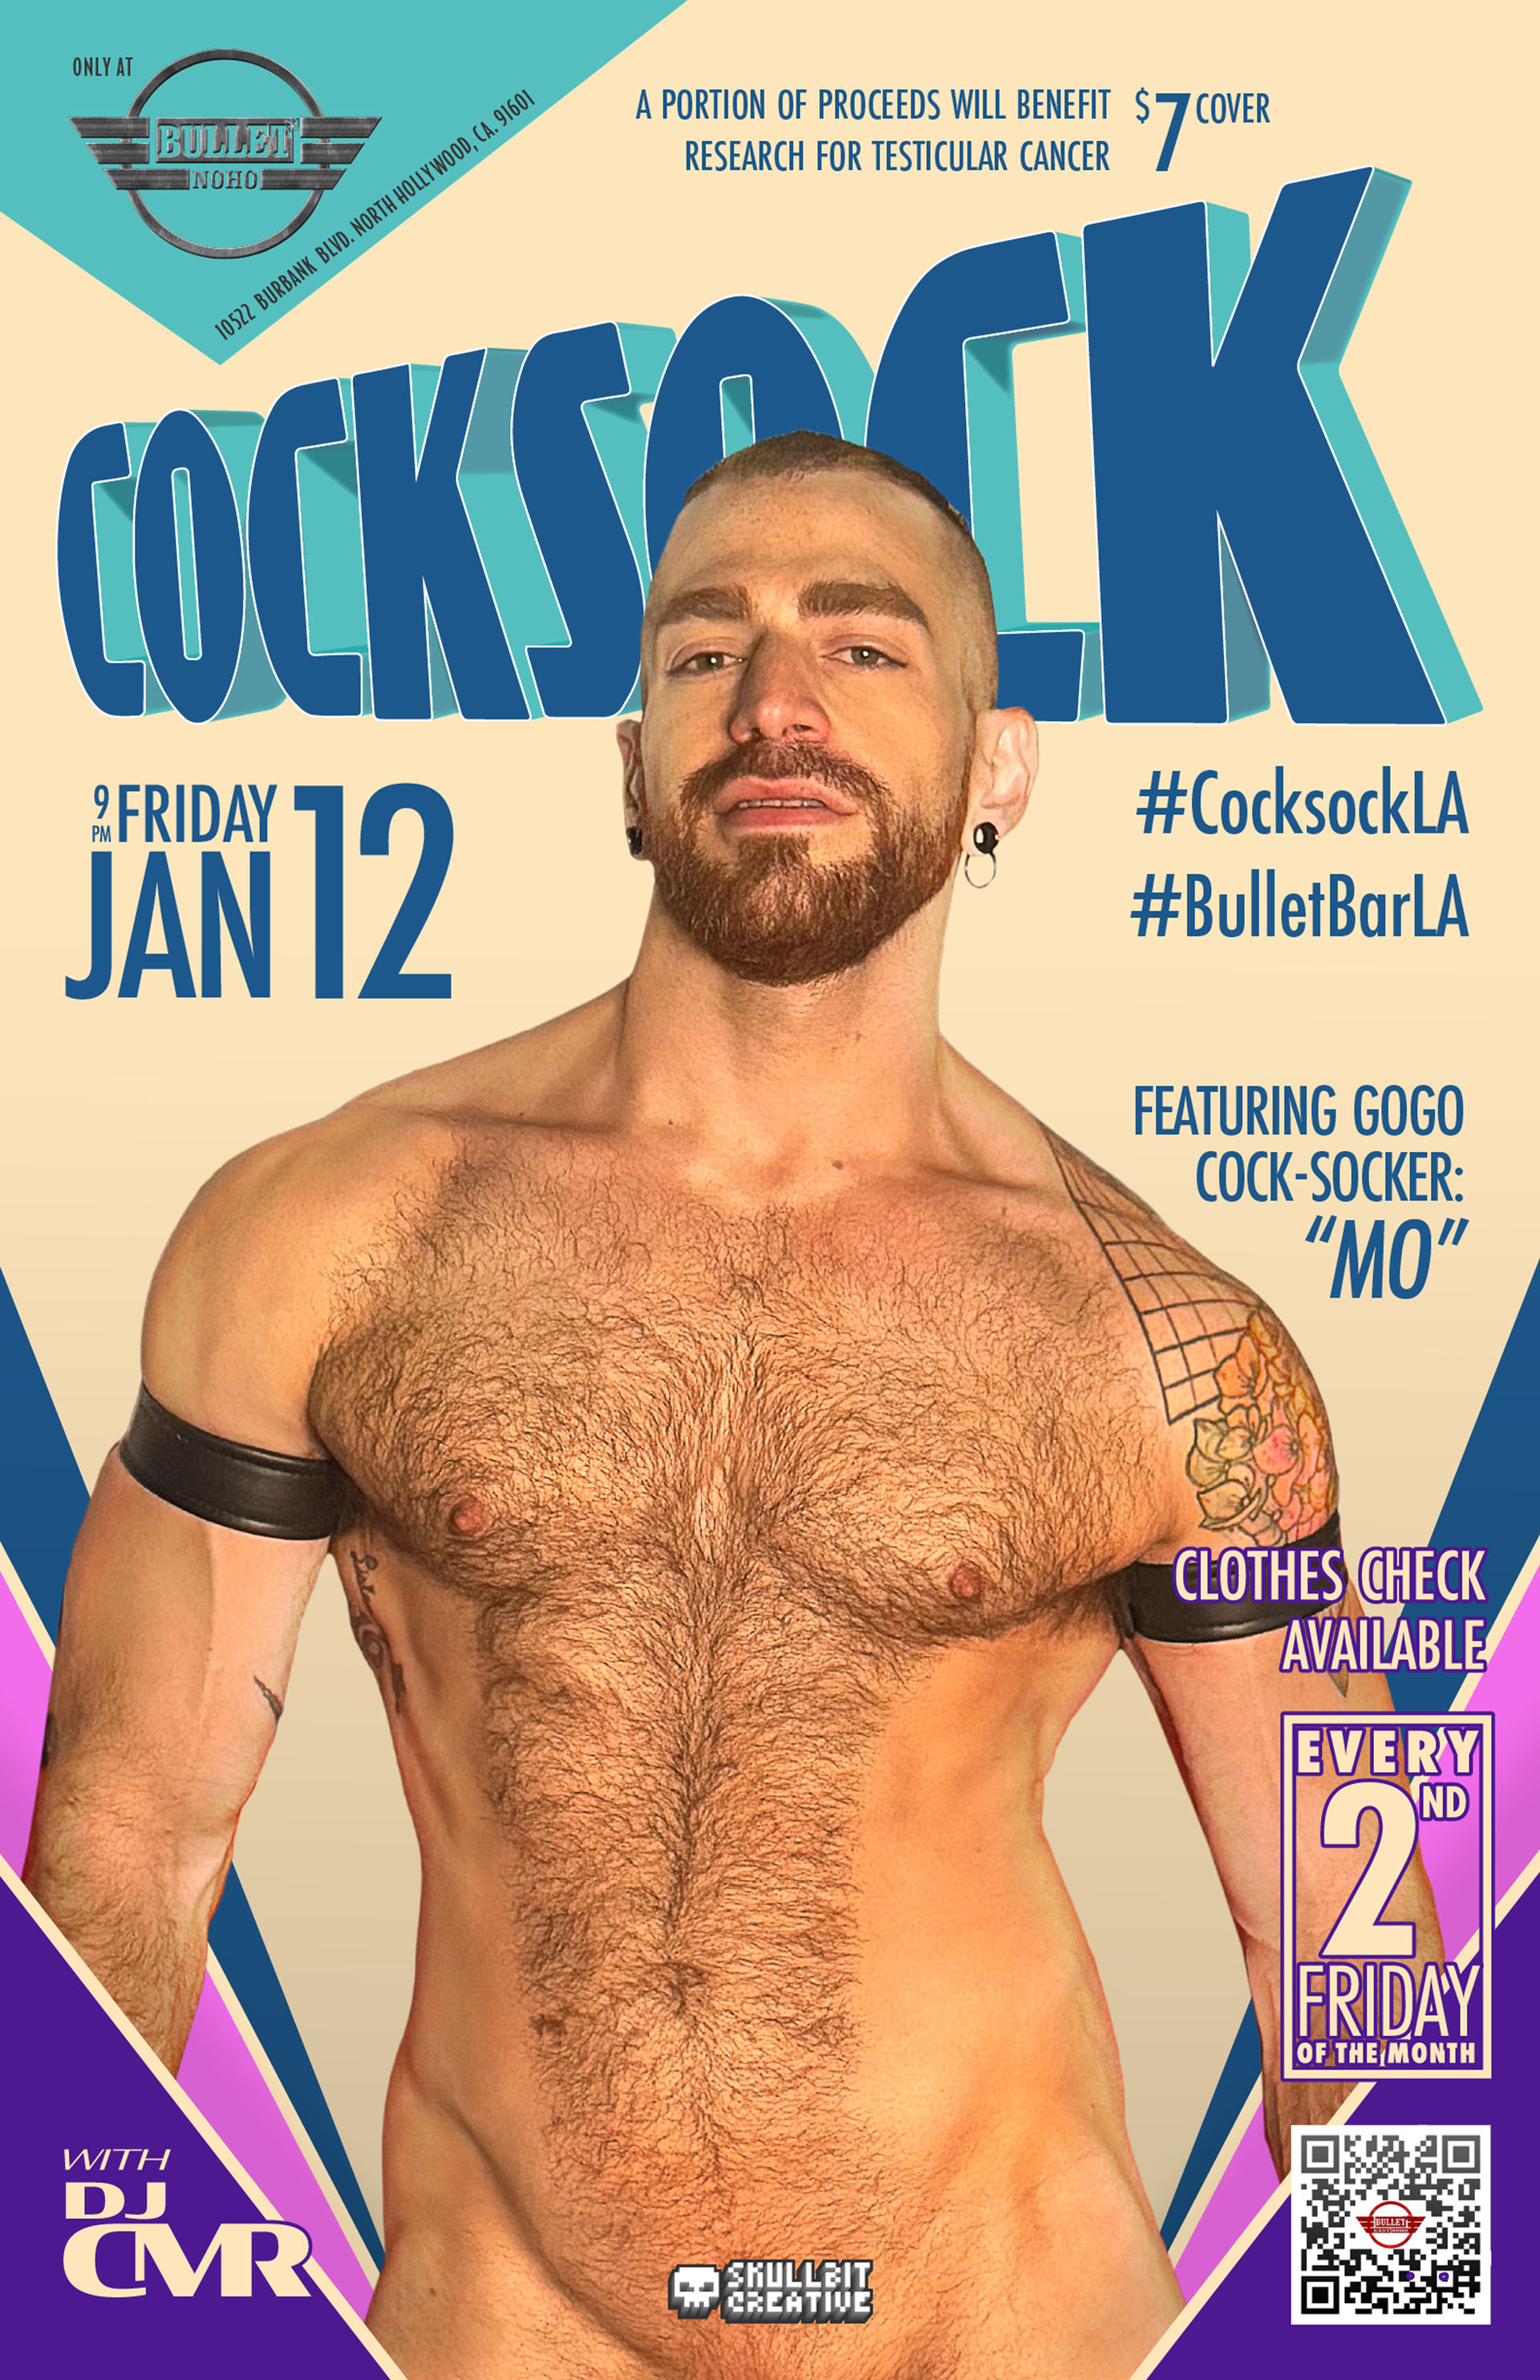 THE BULLET BAR & SKULLBIT CREATIVE Present COCKSOCK: Friday, 01/12/24 at 9:00 PM. $7 cover. Clothes Check available. A portion of the proceeds will go to benefit research for testicular cancer.